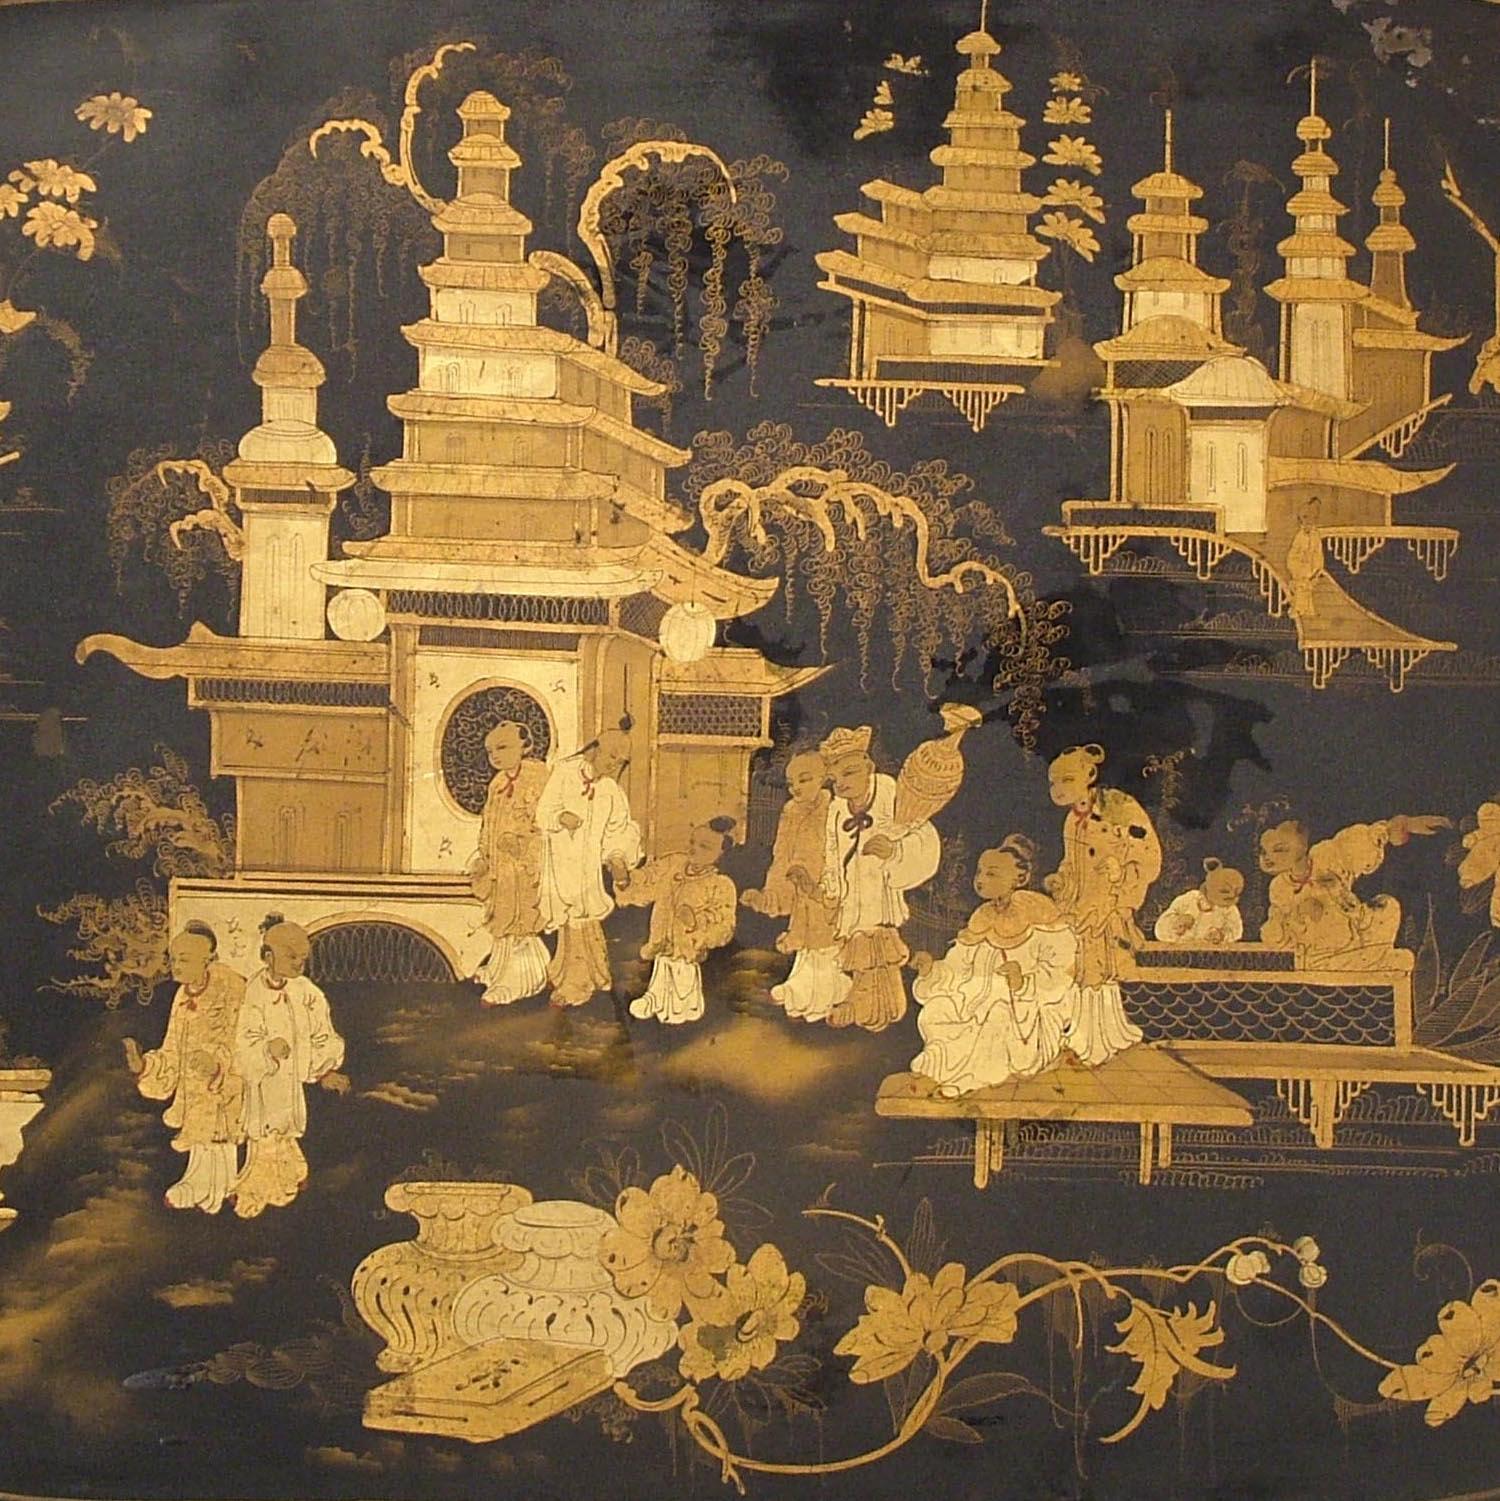 Japanned onto tinplated steel, of dished form, with radiused corners and pierced handles, decorated in gilt with Chinoiserie scenes of court life.

Dimensions: 26 in / 66 cm x 33 in / 84 cm.

After the invention of the rolling mill, which